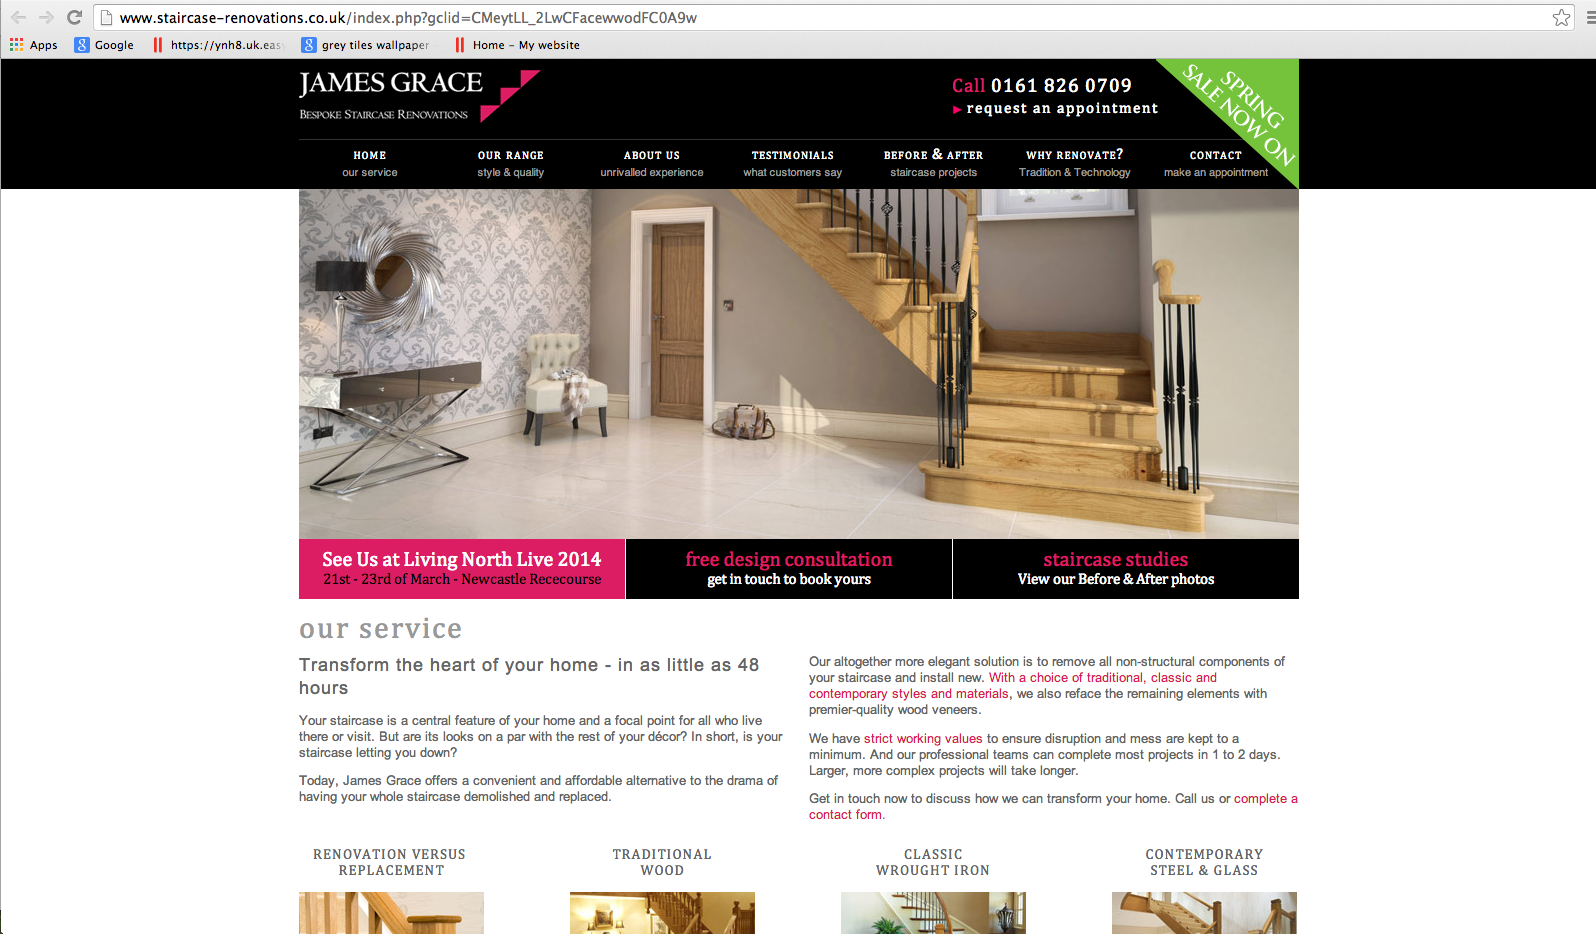 www.Staircase-Renovations.co.uk Website Review